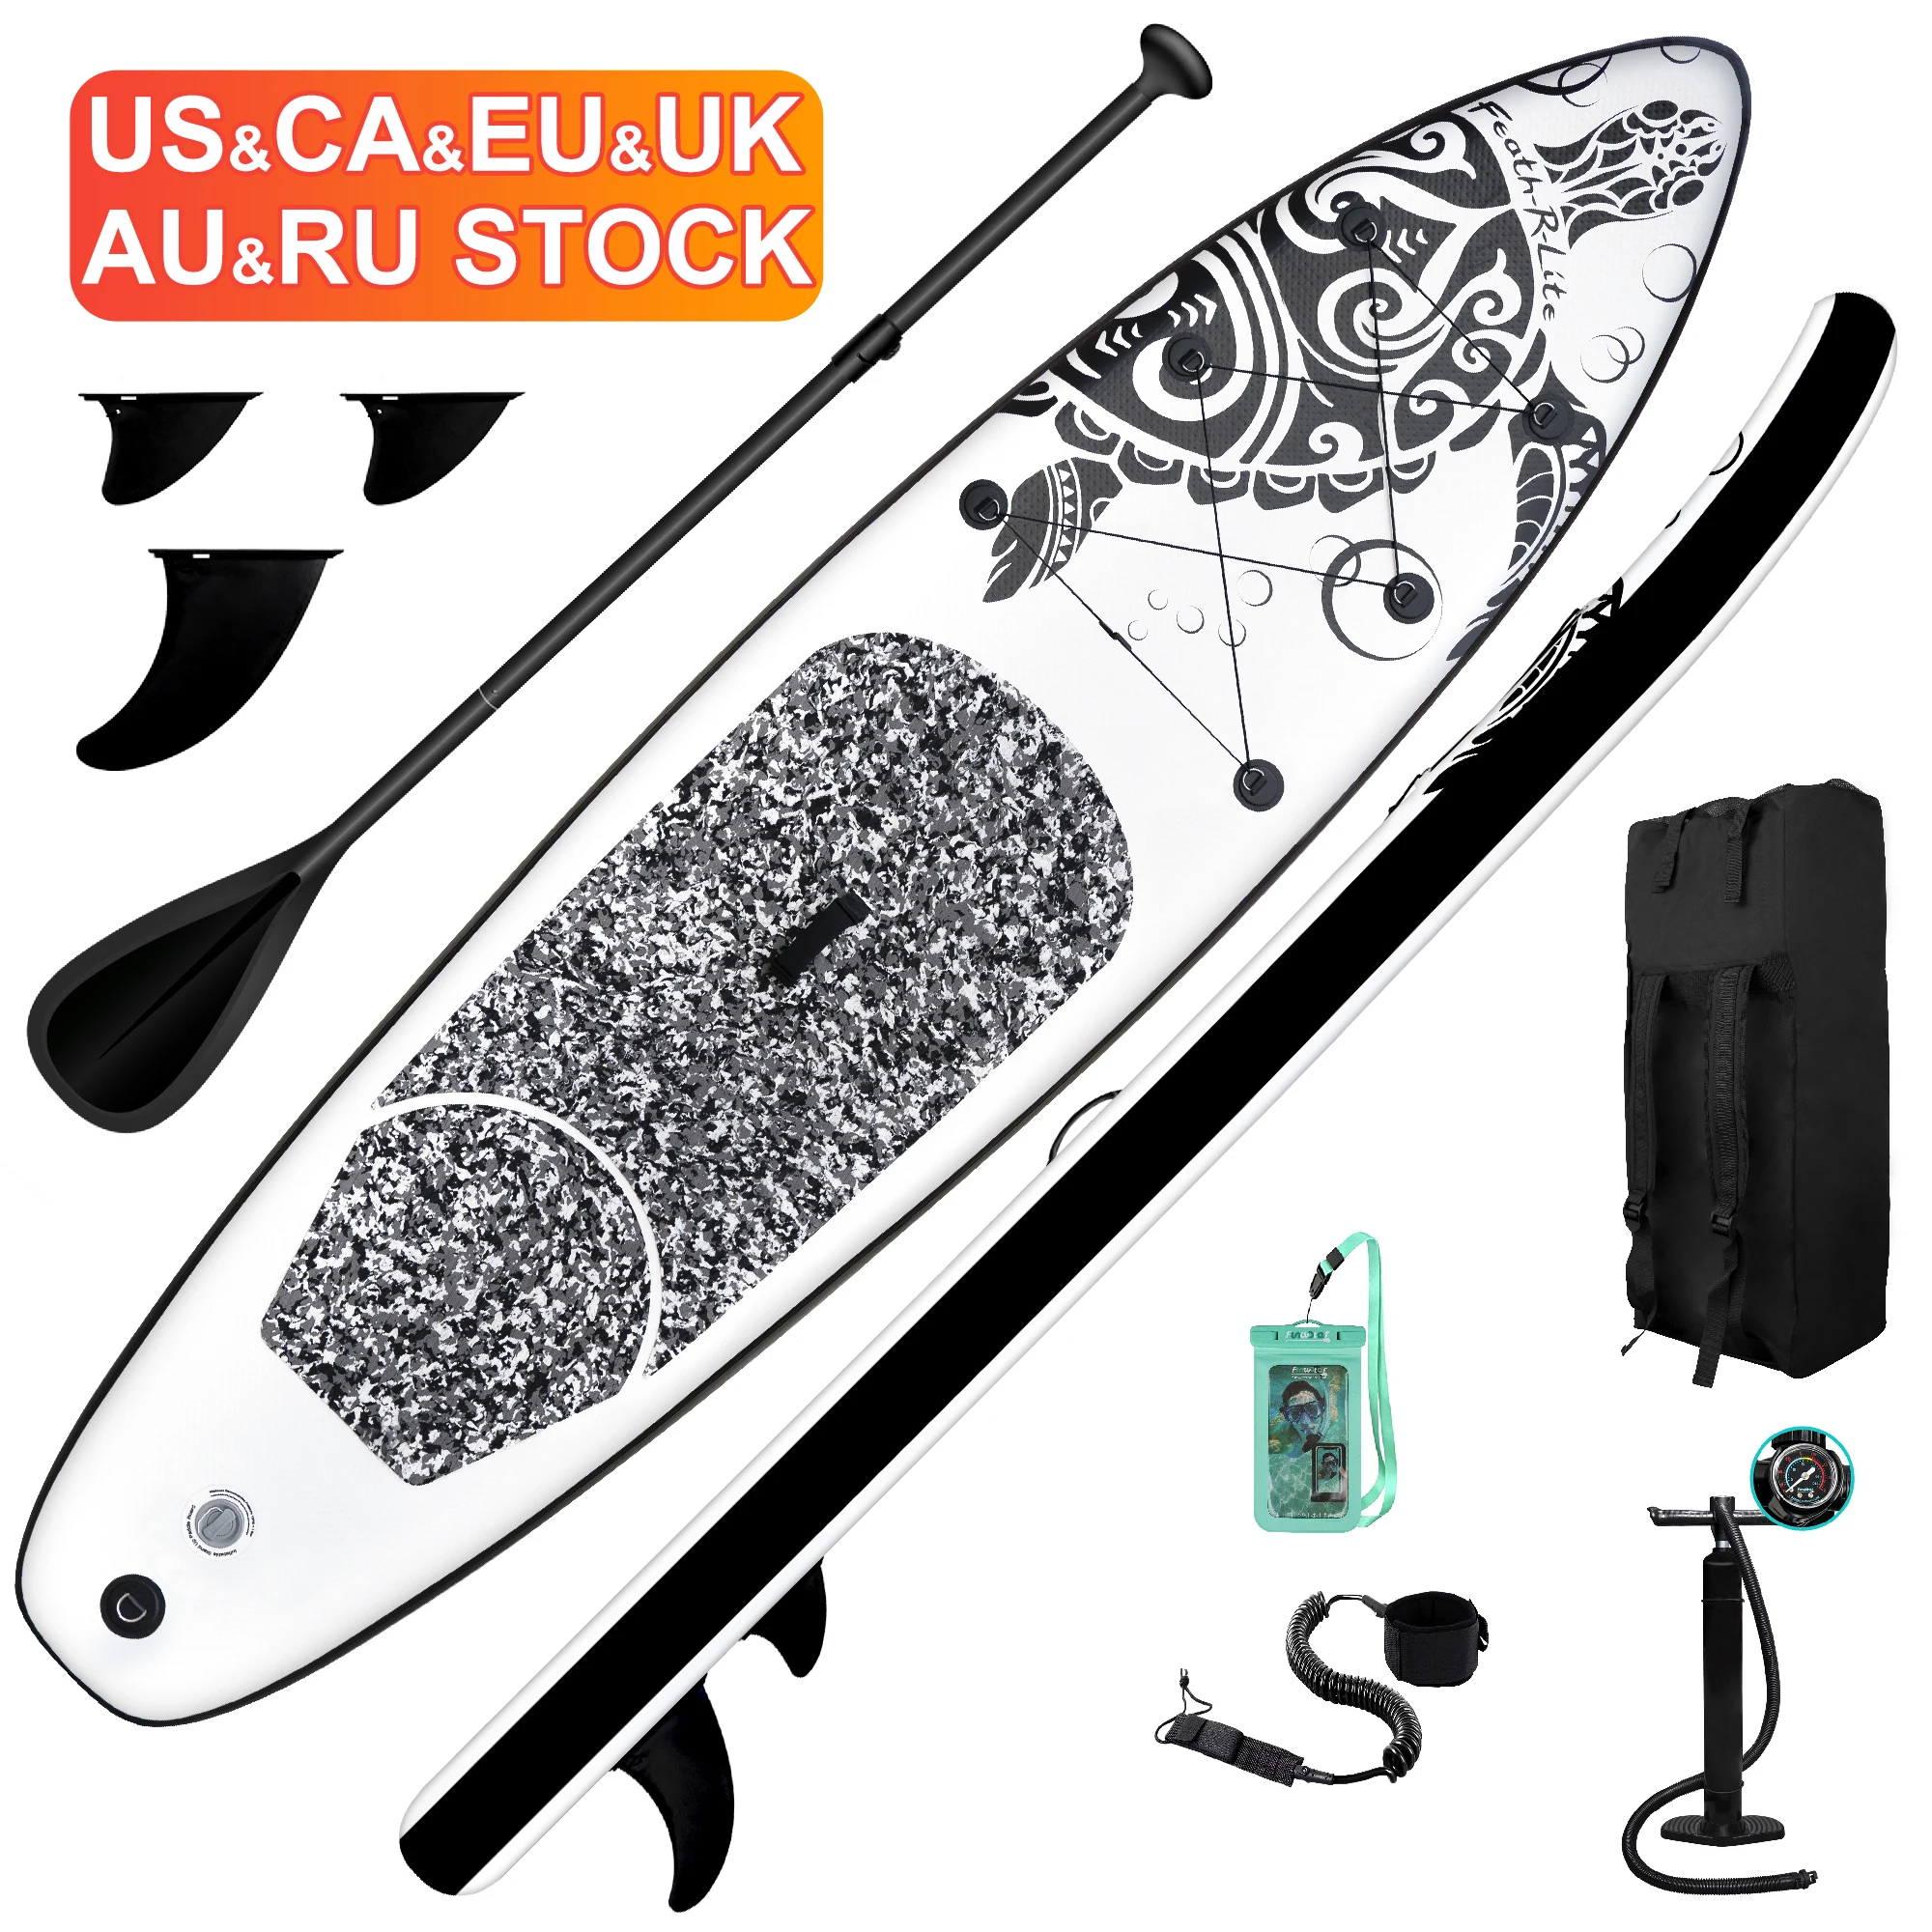 

FUNWATER Dropshipping OEM amazon hot sales 10'6" sup board paddle board inflatable stand up paddleboarding wholesale sup boards, Black